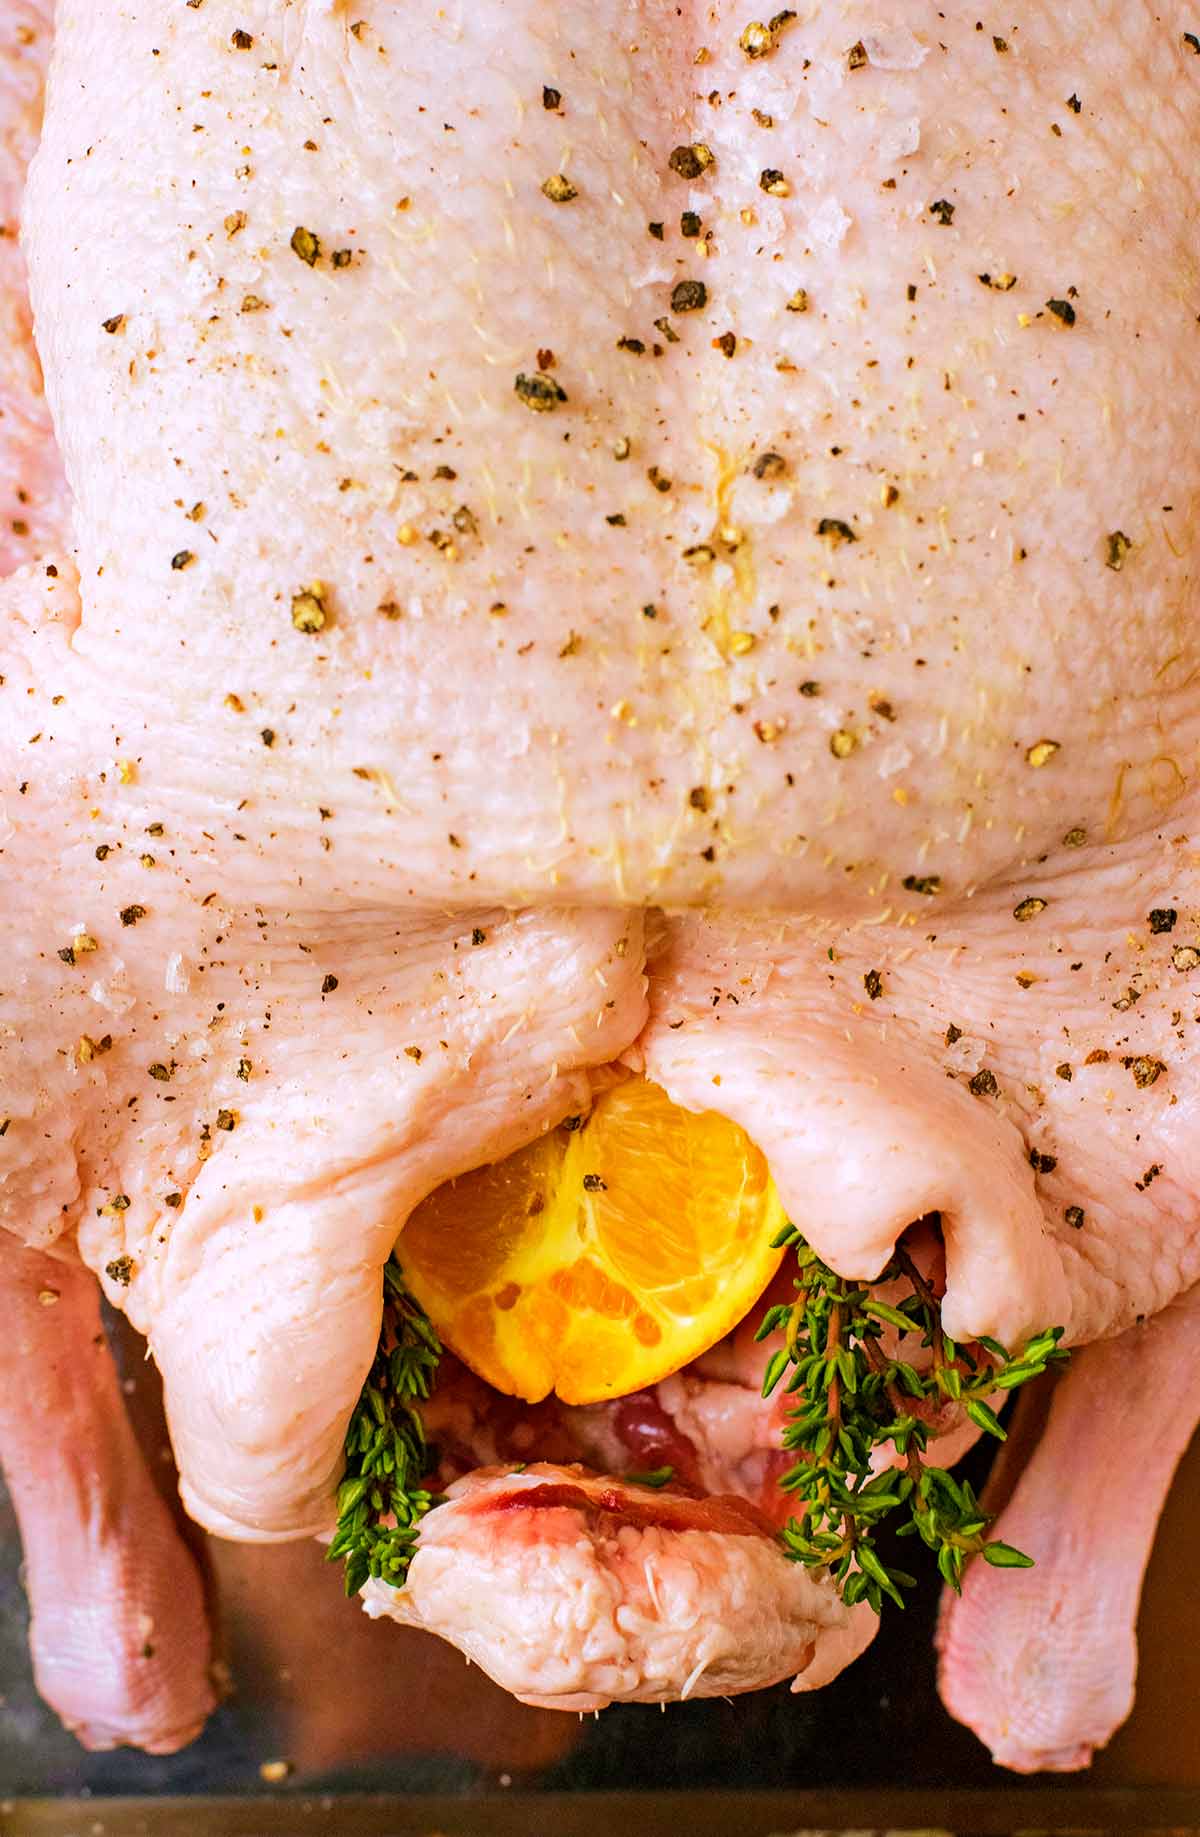 An uncooked duck in a roasting pan. An orange half and thyme are in the bird's cavity.